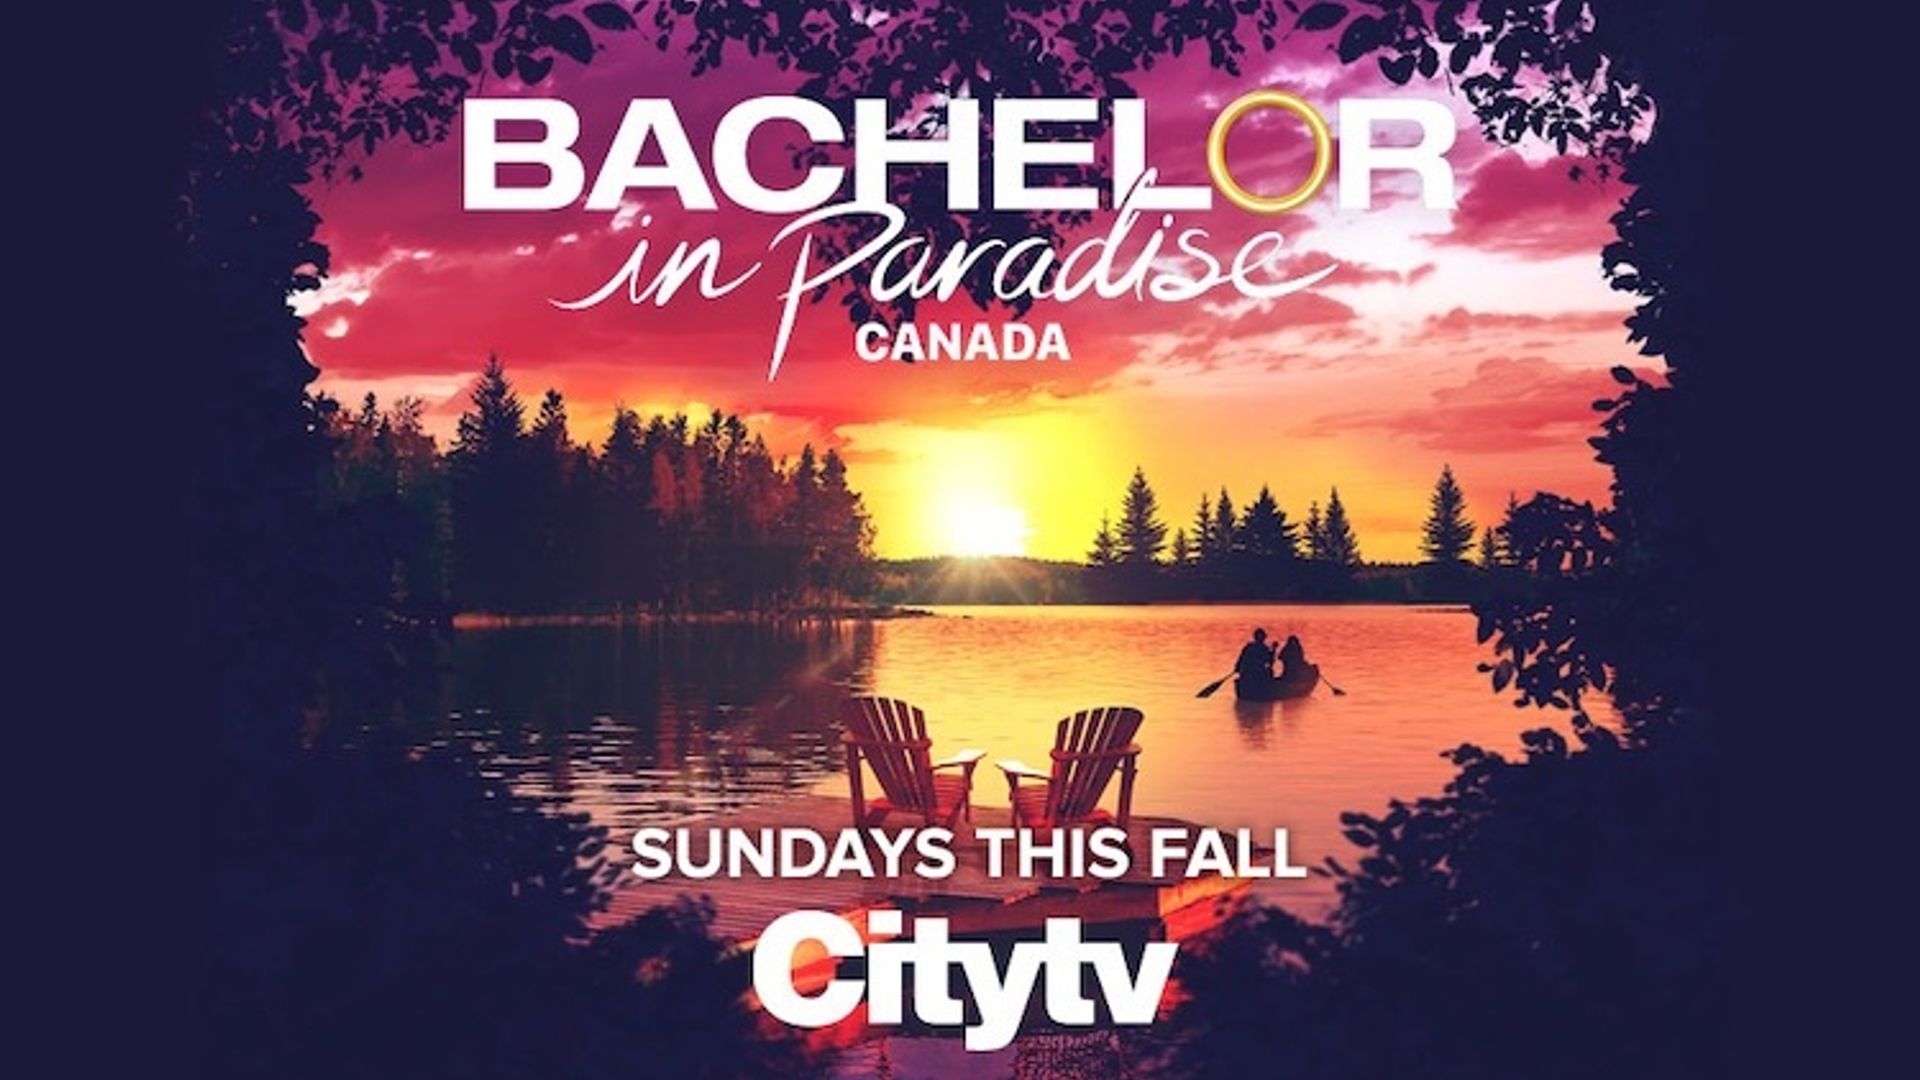 'Bachelor in Paradise Canada' is set to heat up TV this fall HELLO!